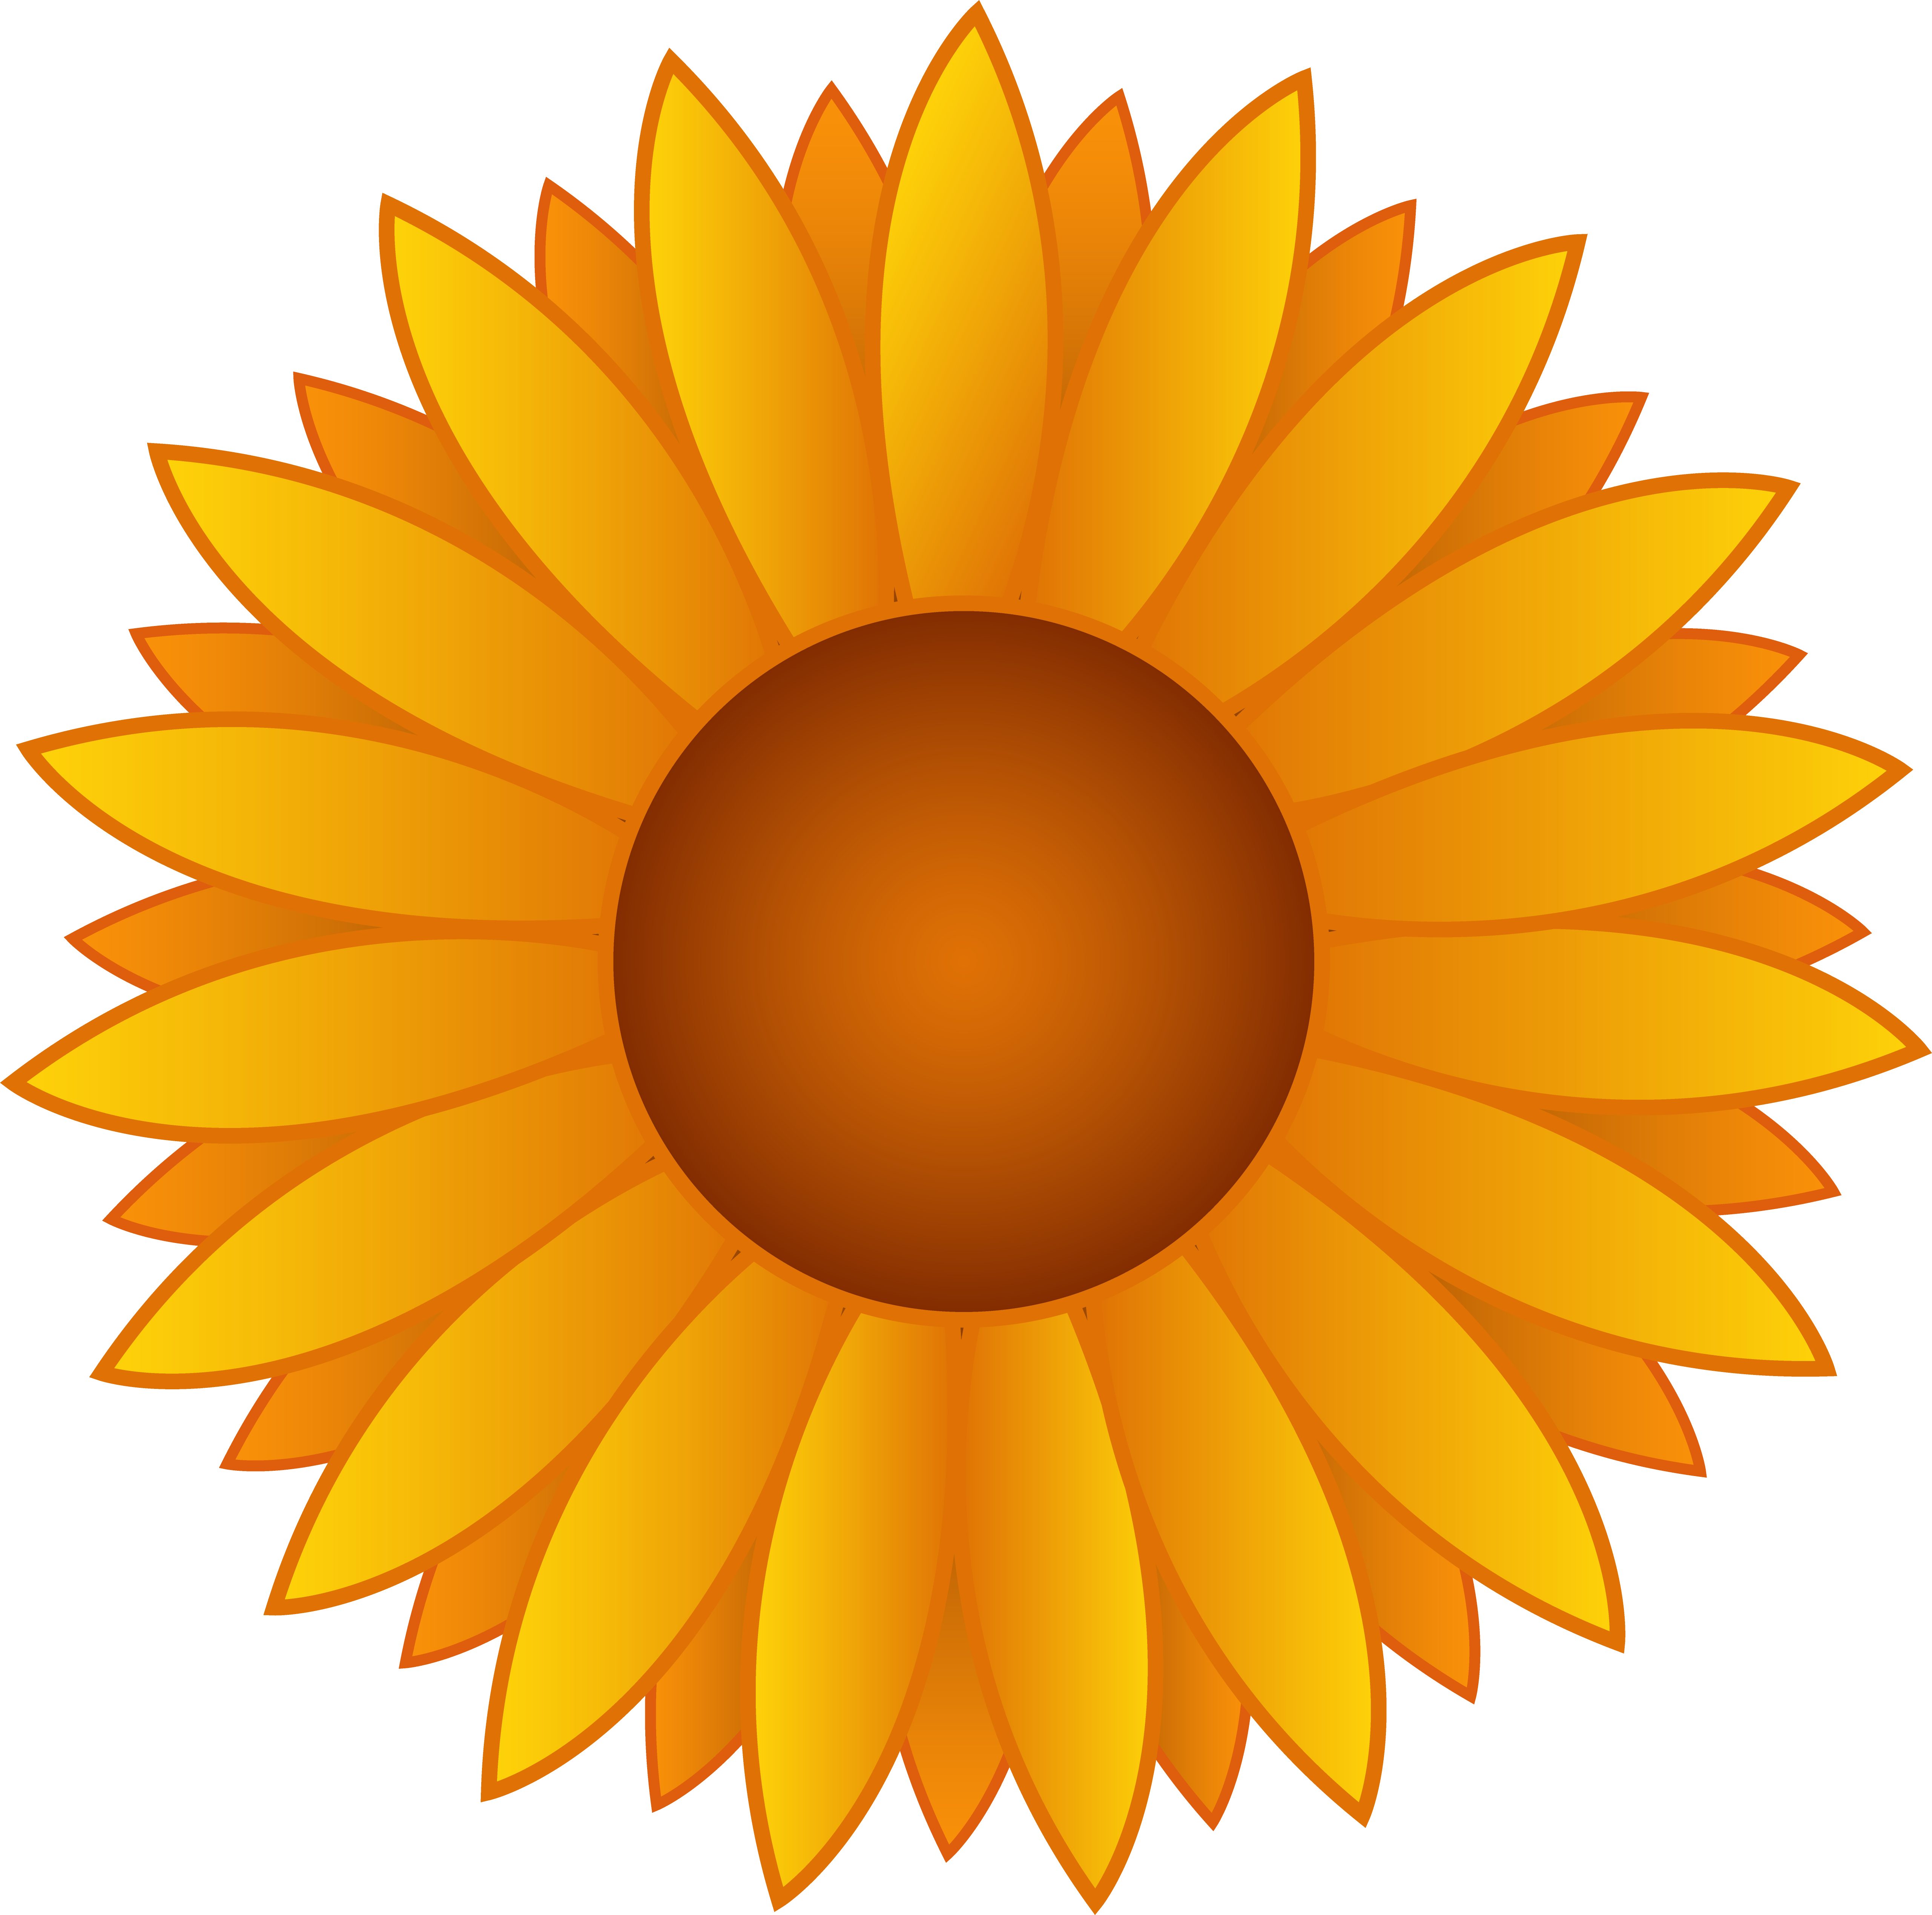 Cartoon Sunflowers Clipart - Cliparts and Others Art Inspiration